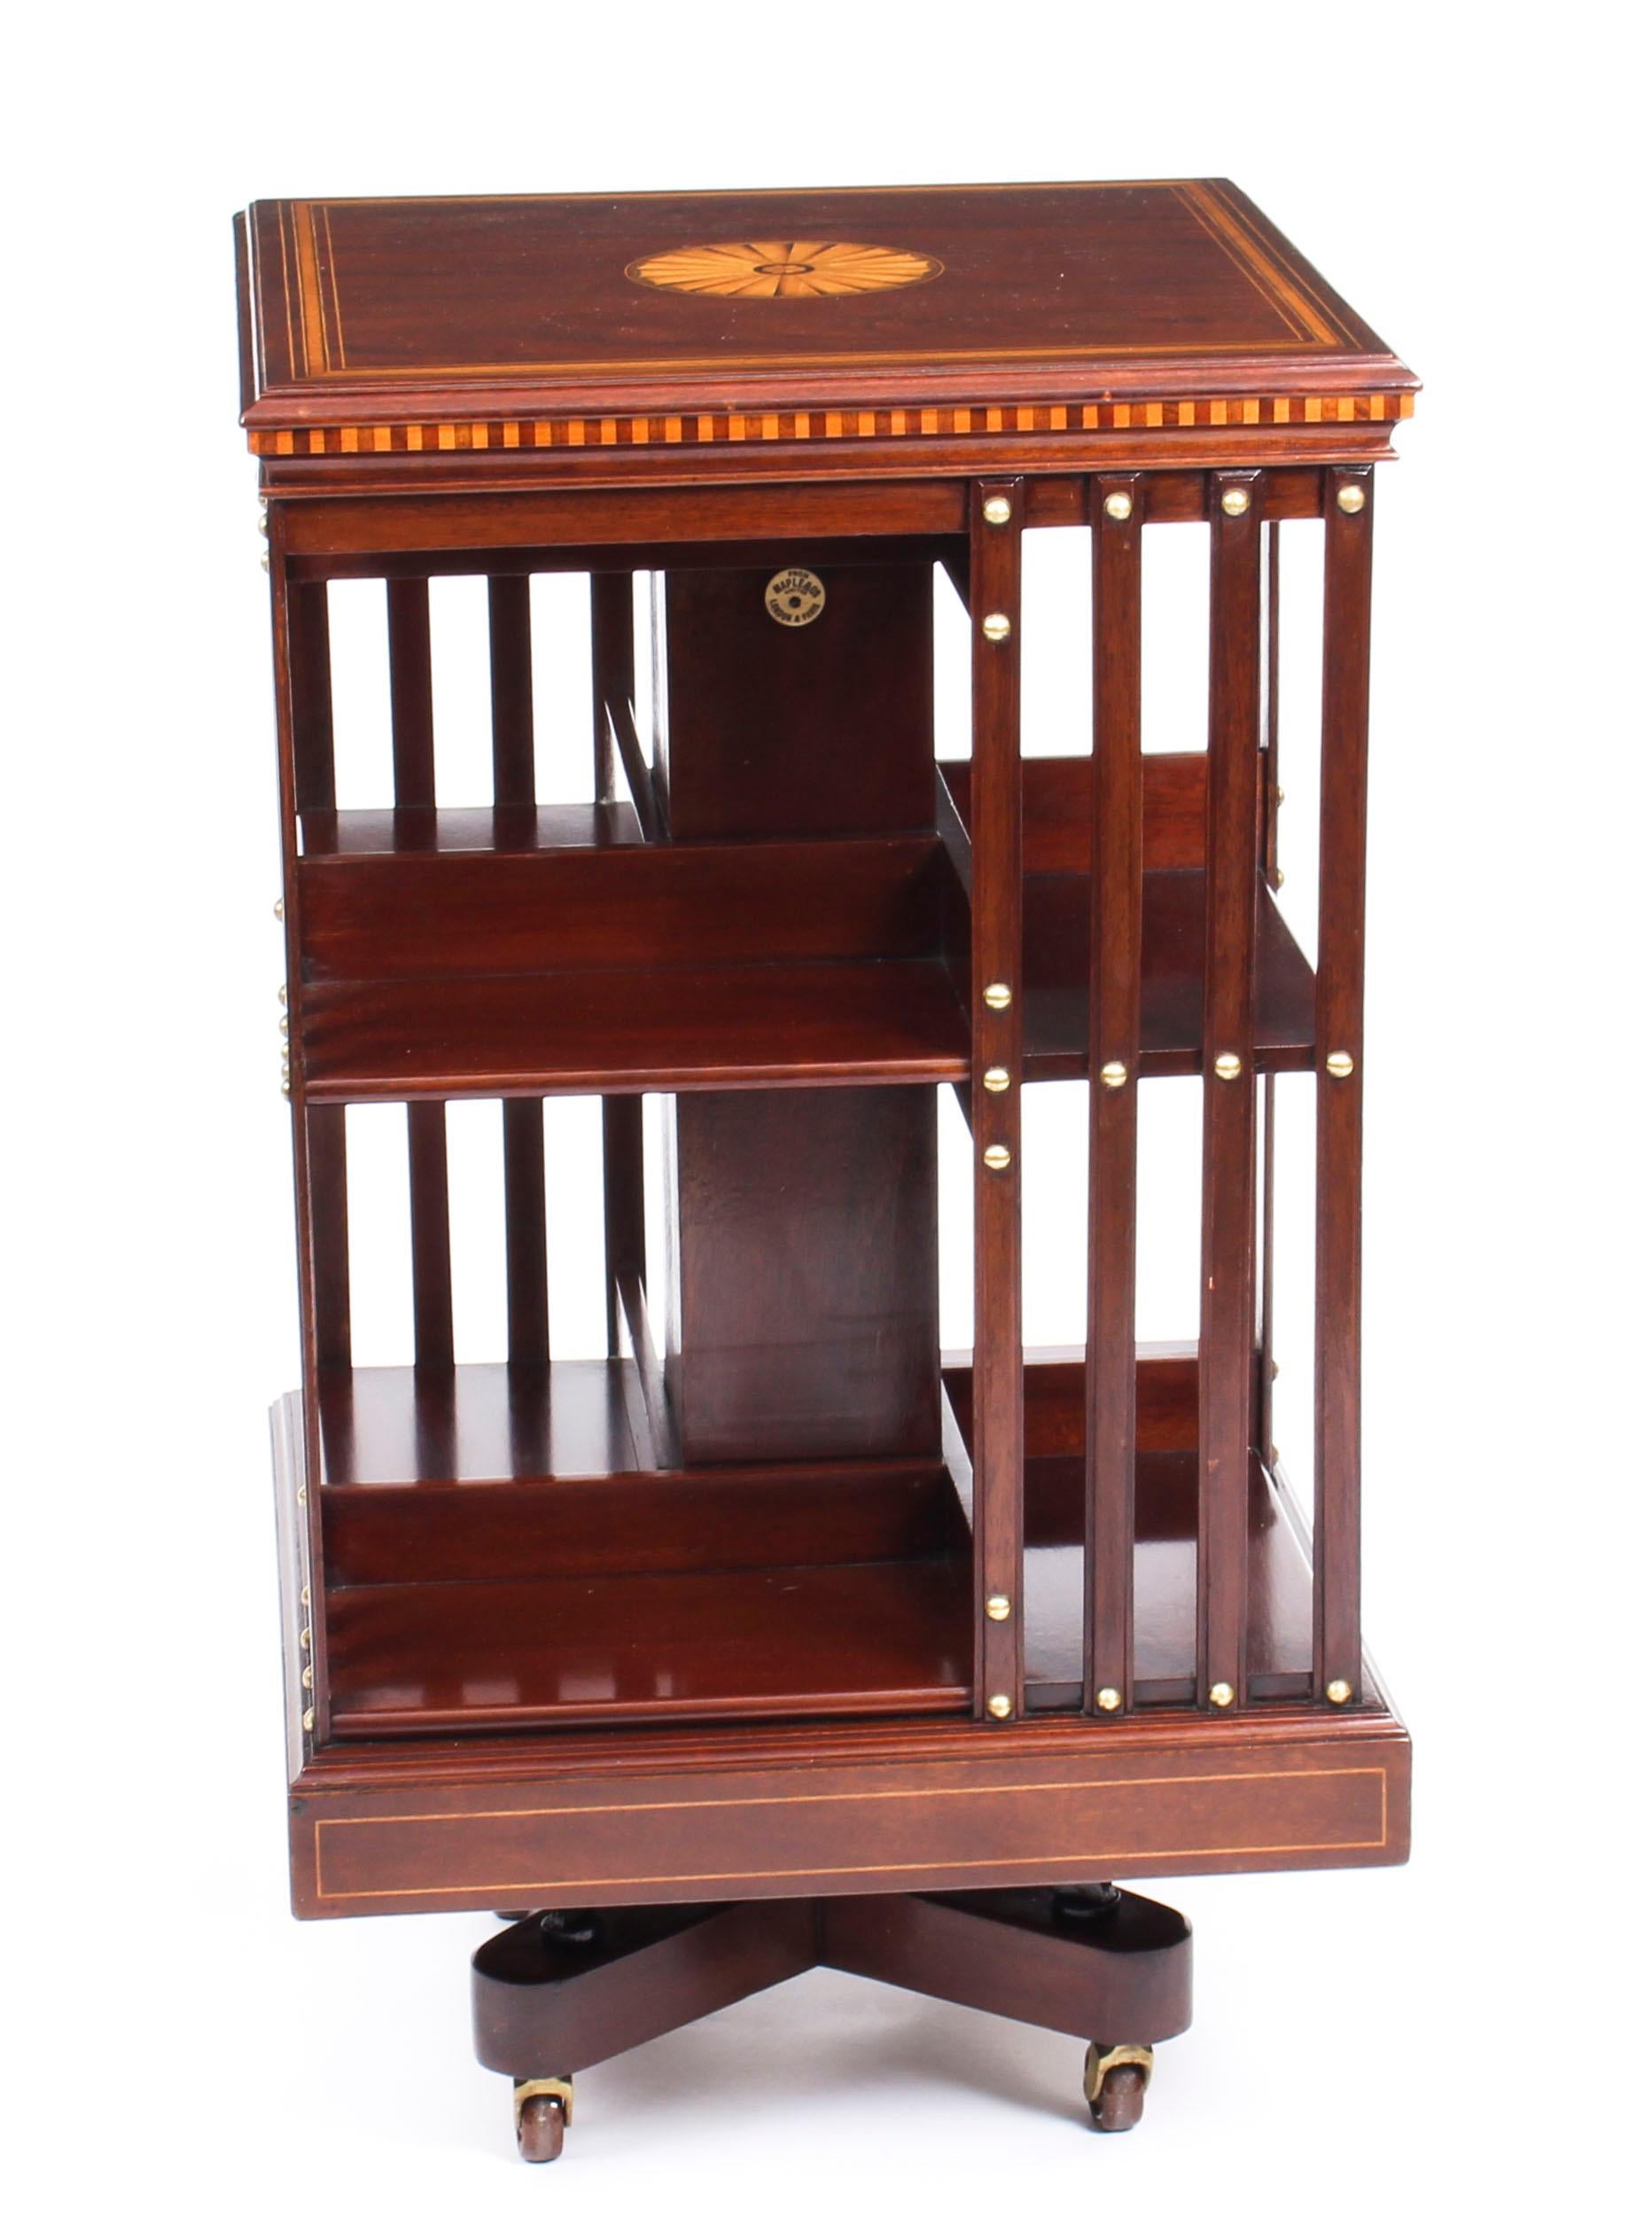 This an exquisite antique revolving bookcase by the renowned Victorian retailer and manufacturer Maple & Co., circa 1900.

It is made of mahogany, revolves on a solid cast iron base, has inlaid boxwood lines to the top and bottom, the top with has